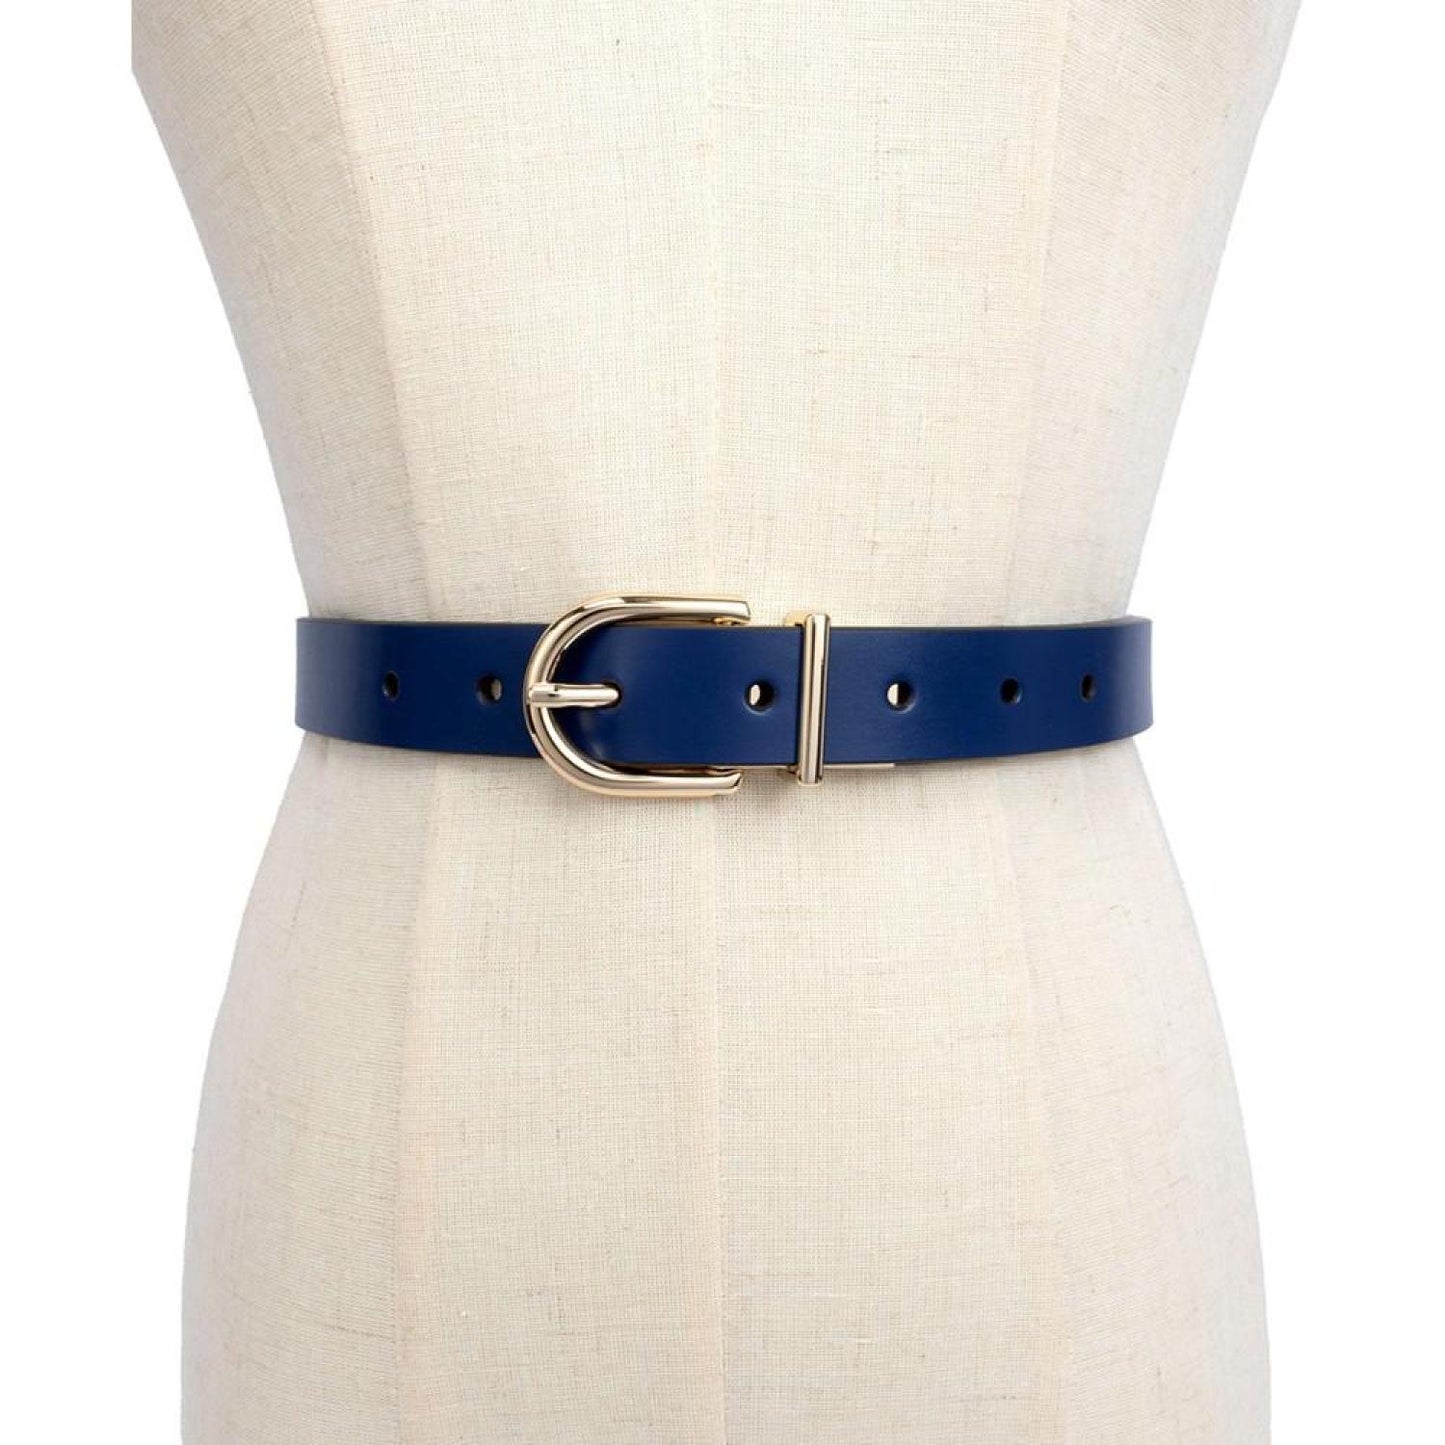 Women's 25mm Reversible Belt, Smooth to Smooth